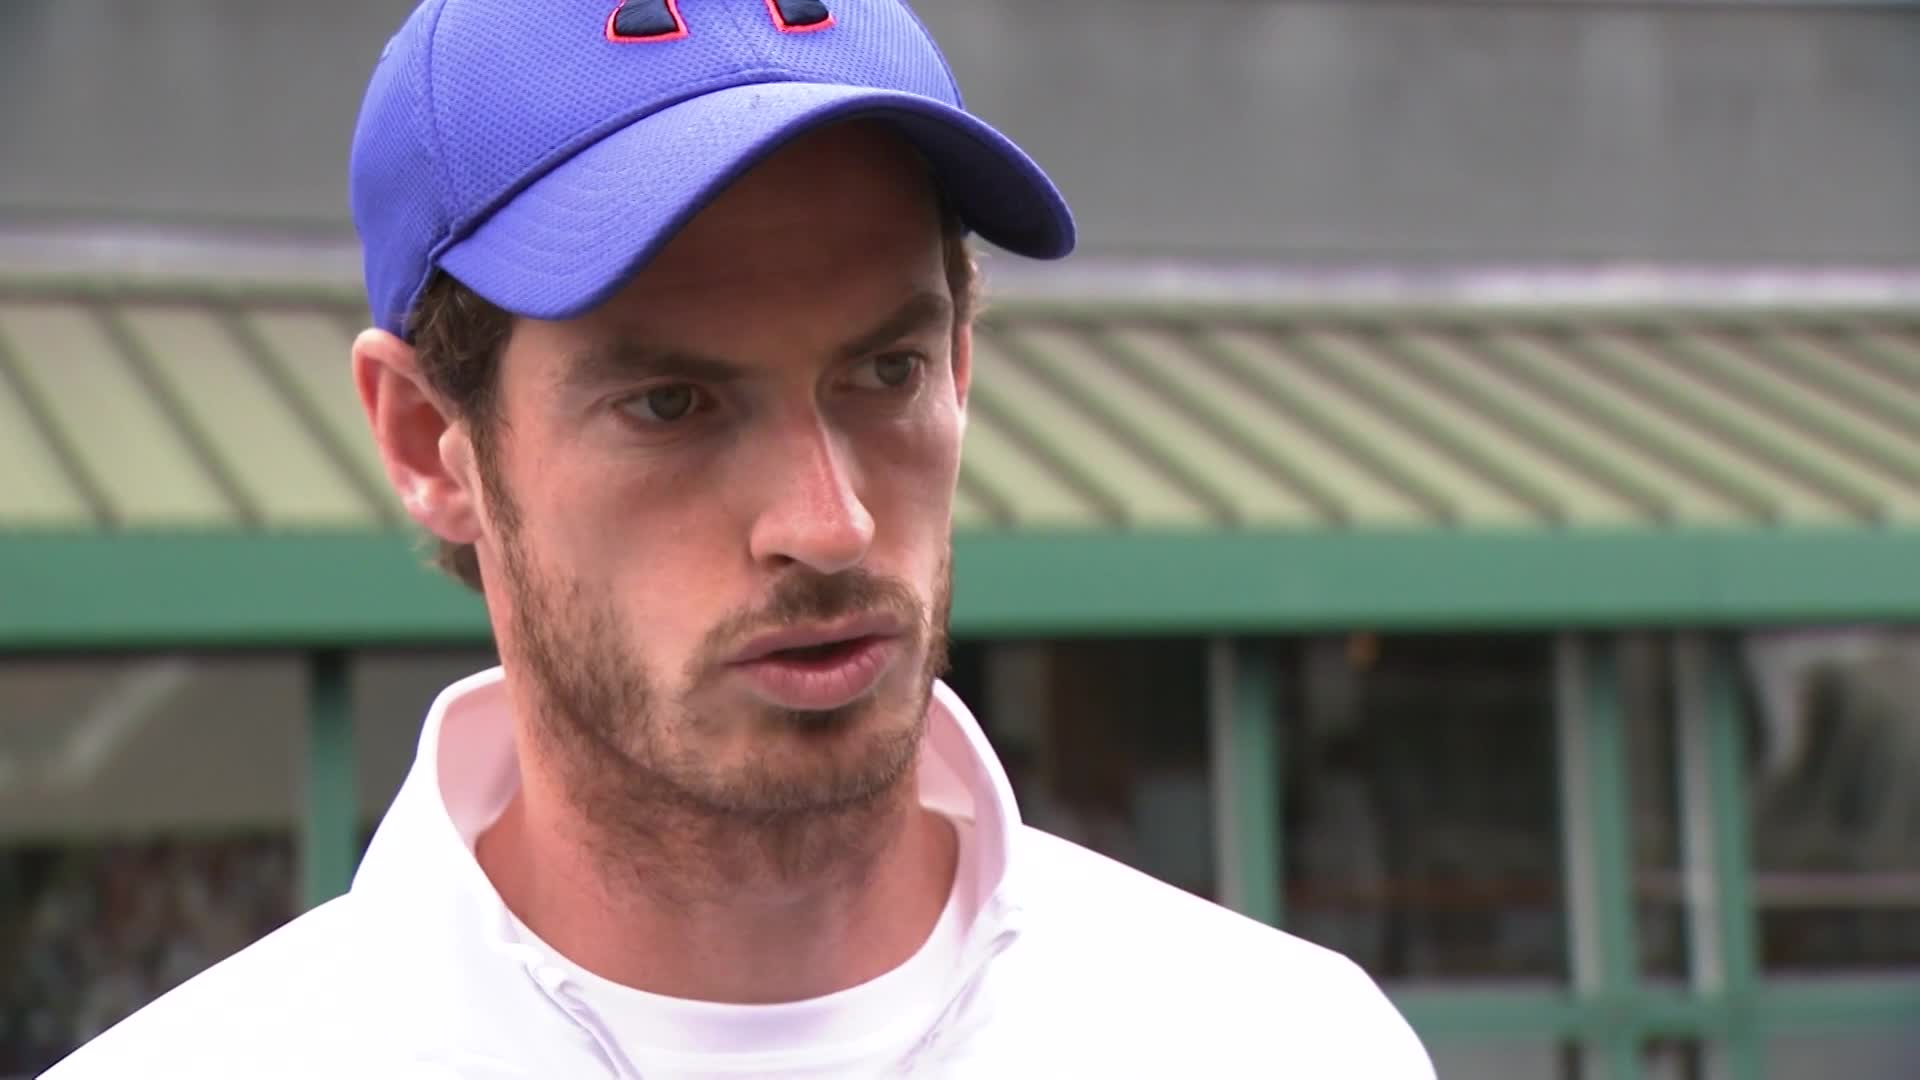 Wimbledon 2016: Andy Murray content with &;strong team&; after Lendl